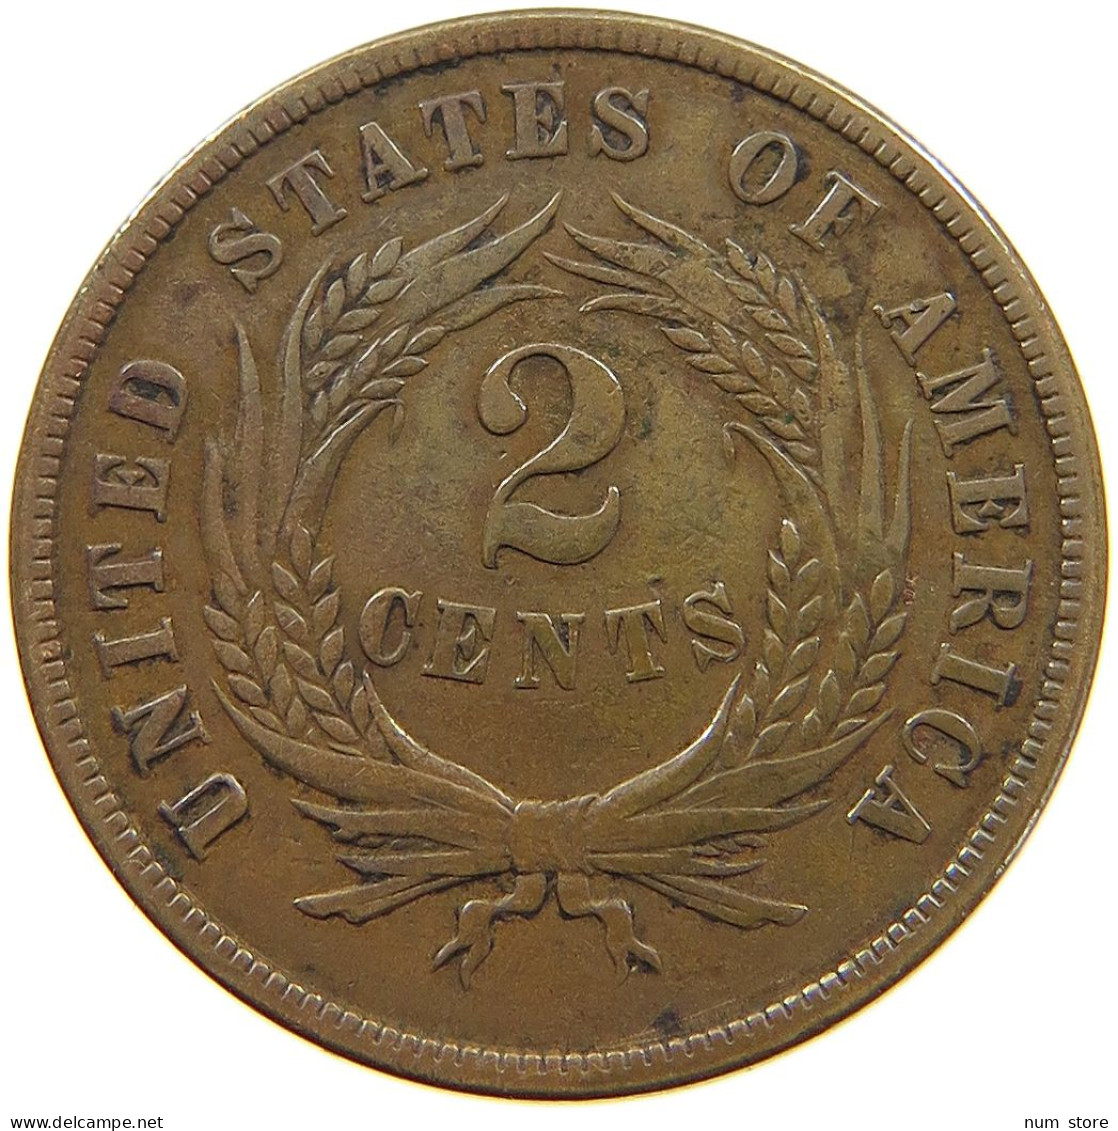 UNITED STATES OF AMERICA TWO CENTS 1865  #t086 0135 - 2, 3 & 20 Cent